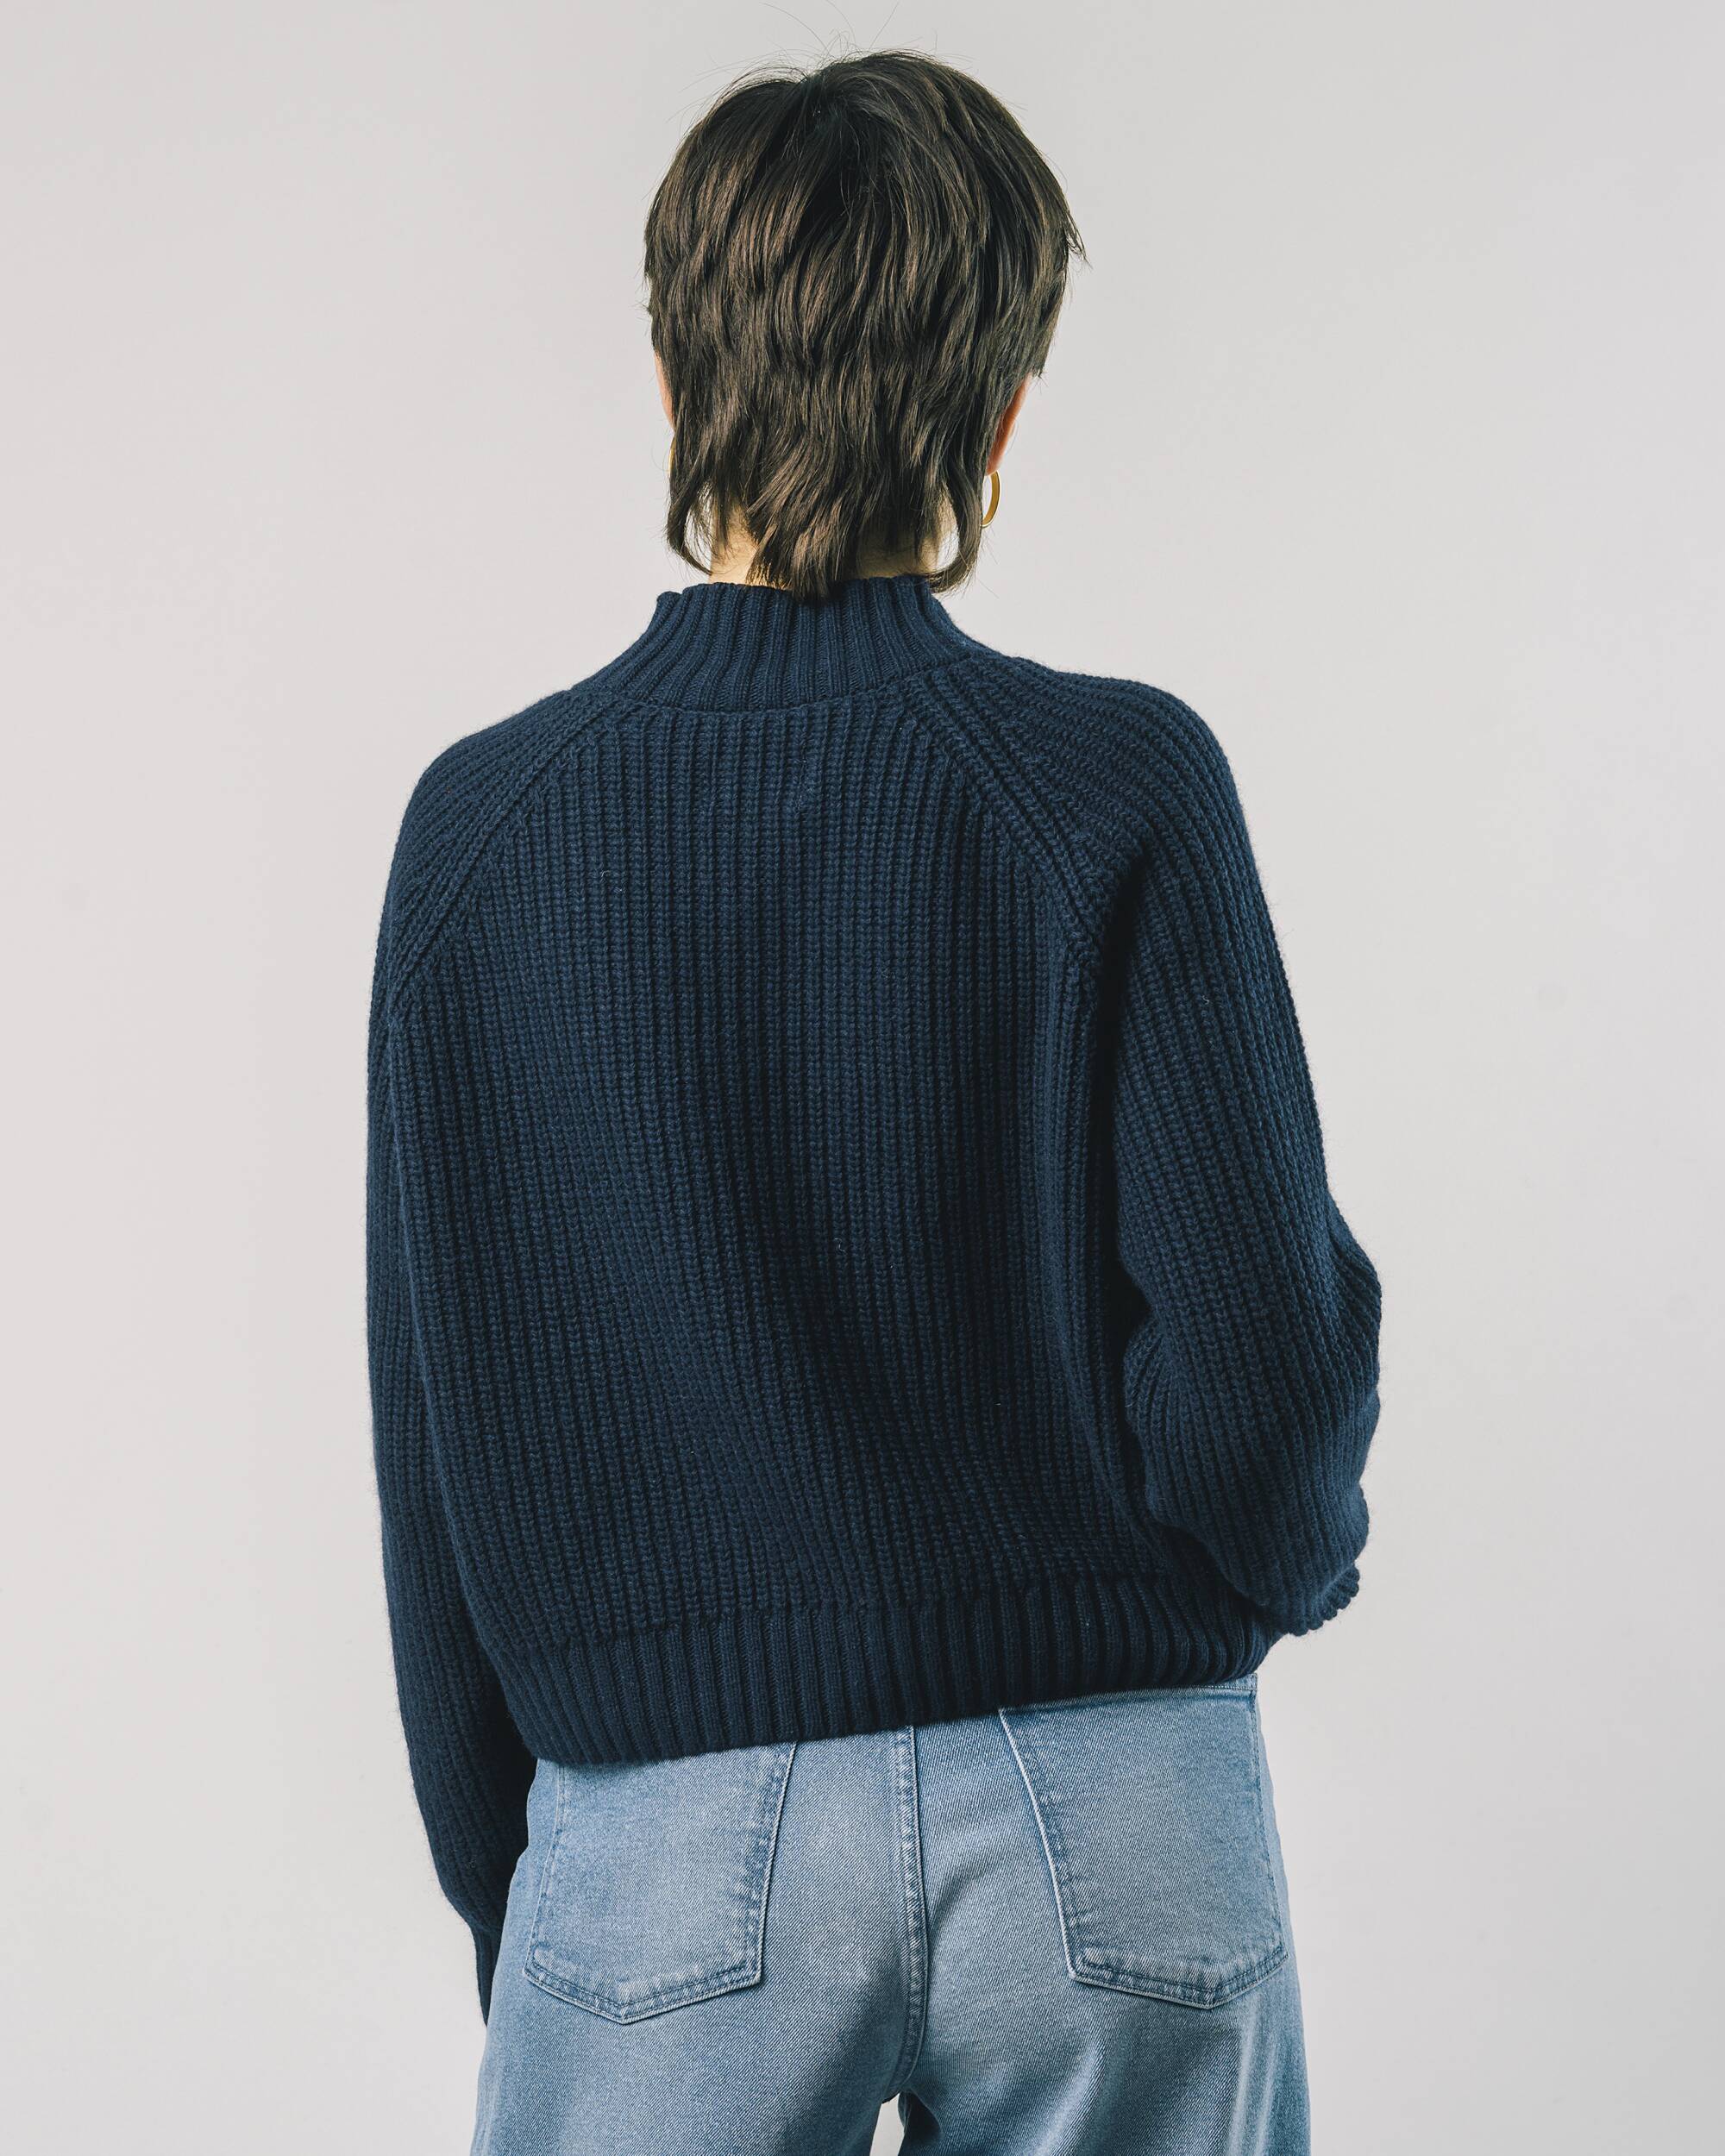 Short-cut sweater "Peony" in navy - blue with a high collar made of recycled cashmere and recycled wool from Brava Fabrics